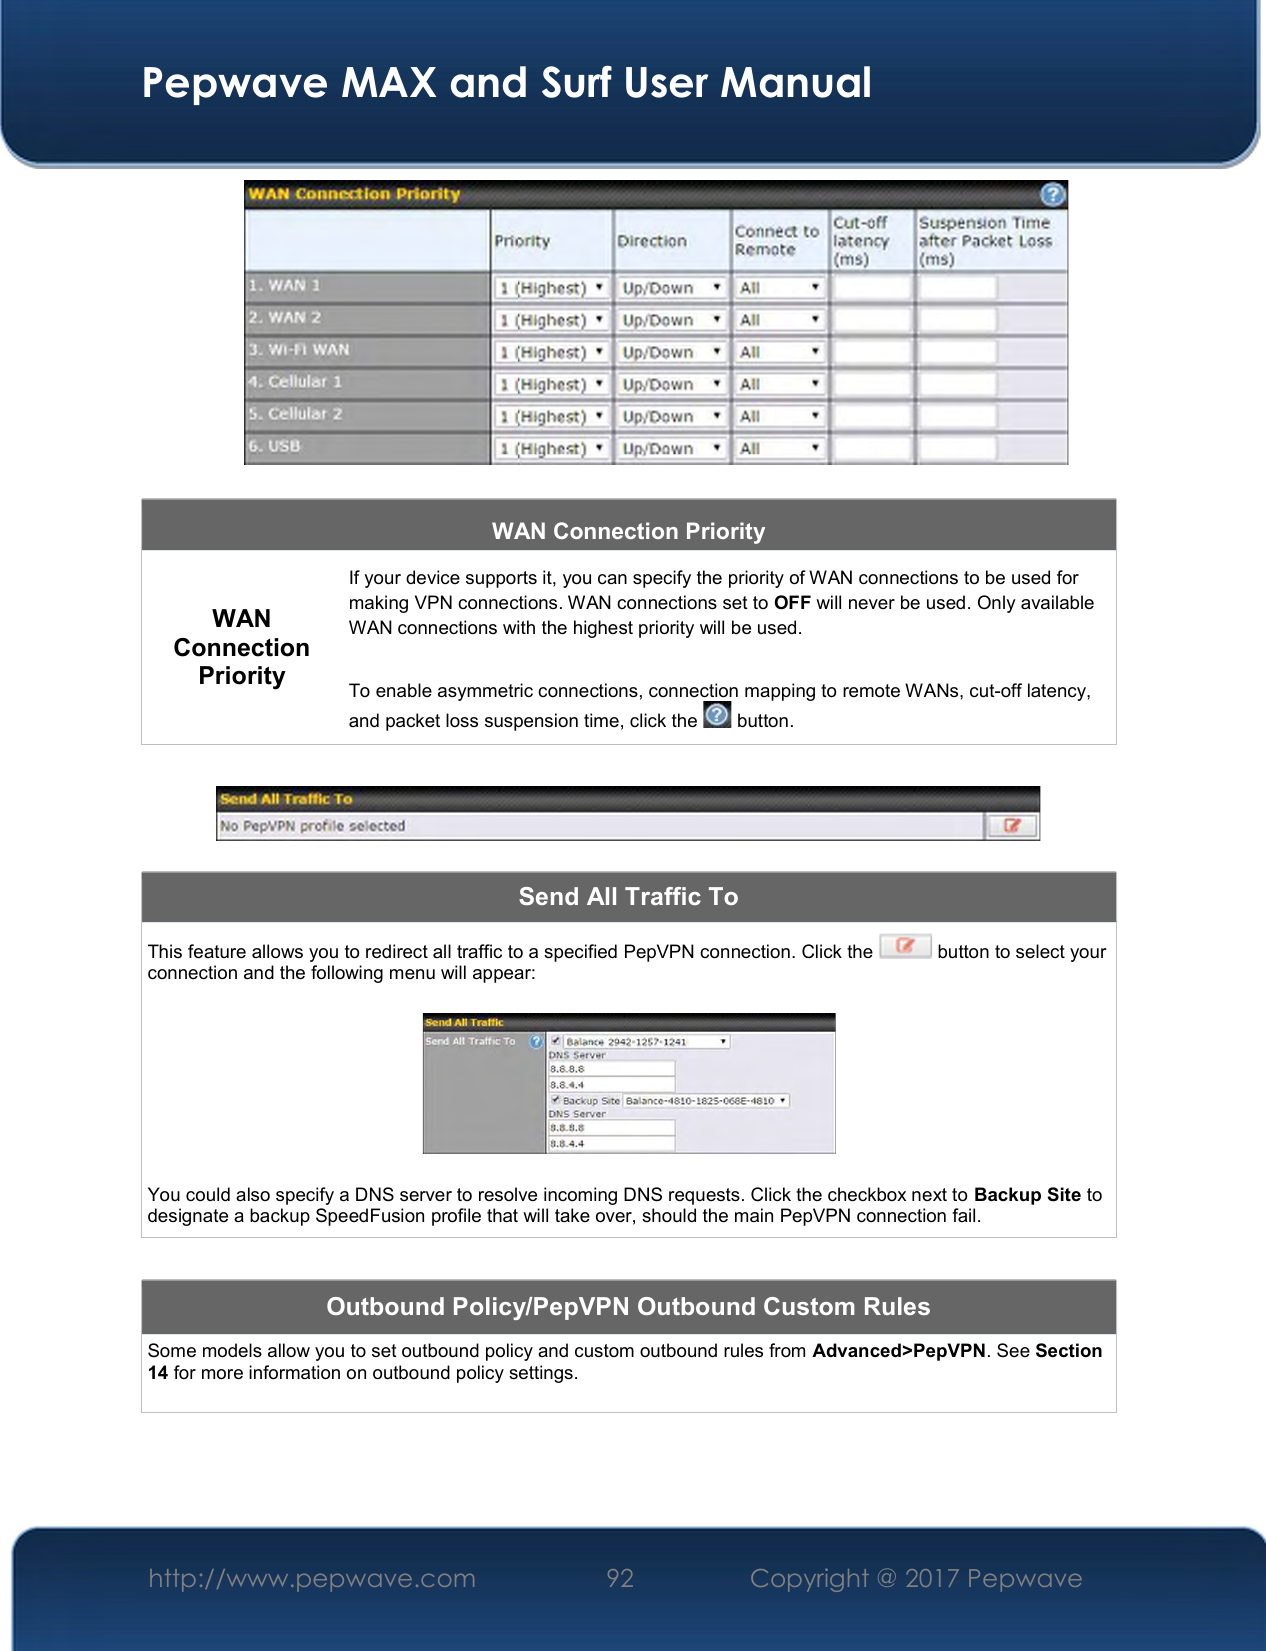  Pepwave MAX and Surf User Manual http://www.pepwave.com  92    Copyright @ 2017 Pepwave    8.41   WAN Connection Priority WAN Connection Priority If your device supports it, you can specify the priority of WAN connections to be used for making VPN connections. WAN connections set to OFF will never be used. Only available WAN connections with the highest priority will be used.   To enable asymmetric connections, connection mapping to remote WANs, cut-off latency, and packet loss suspension time, click the   button.    Send All Traffic To This feature allows you to redirect all traffic to a specified PepVPN connection. Click the   button to select your connection and the following menu will appear:    You could also specify a DNS server to resolve incoming DNS requests. Click the checkbox next to Backup Site to designate a backup SpeedFusion profile that will take over, should the main PepVPN connection fail.  Outbound Policy/PepVPN Outbound Custom Rules Some models allow you to set outbound policy and custom outbound rules from Advanced&gt;PepVPN. See Section 14 for more information on outbound policy settings.   